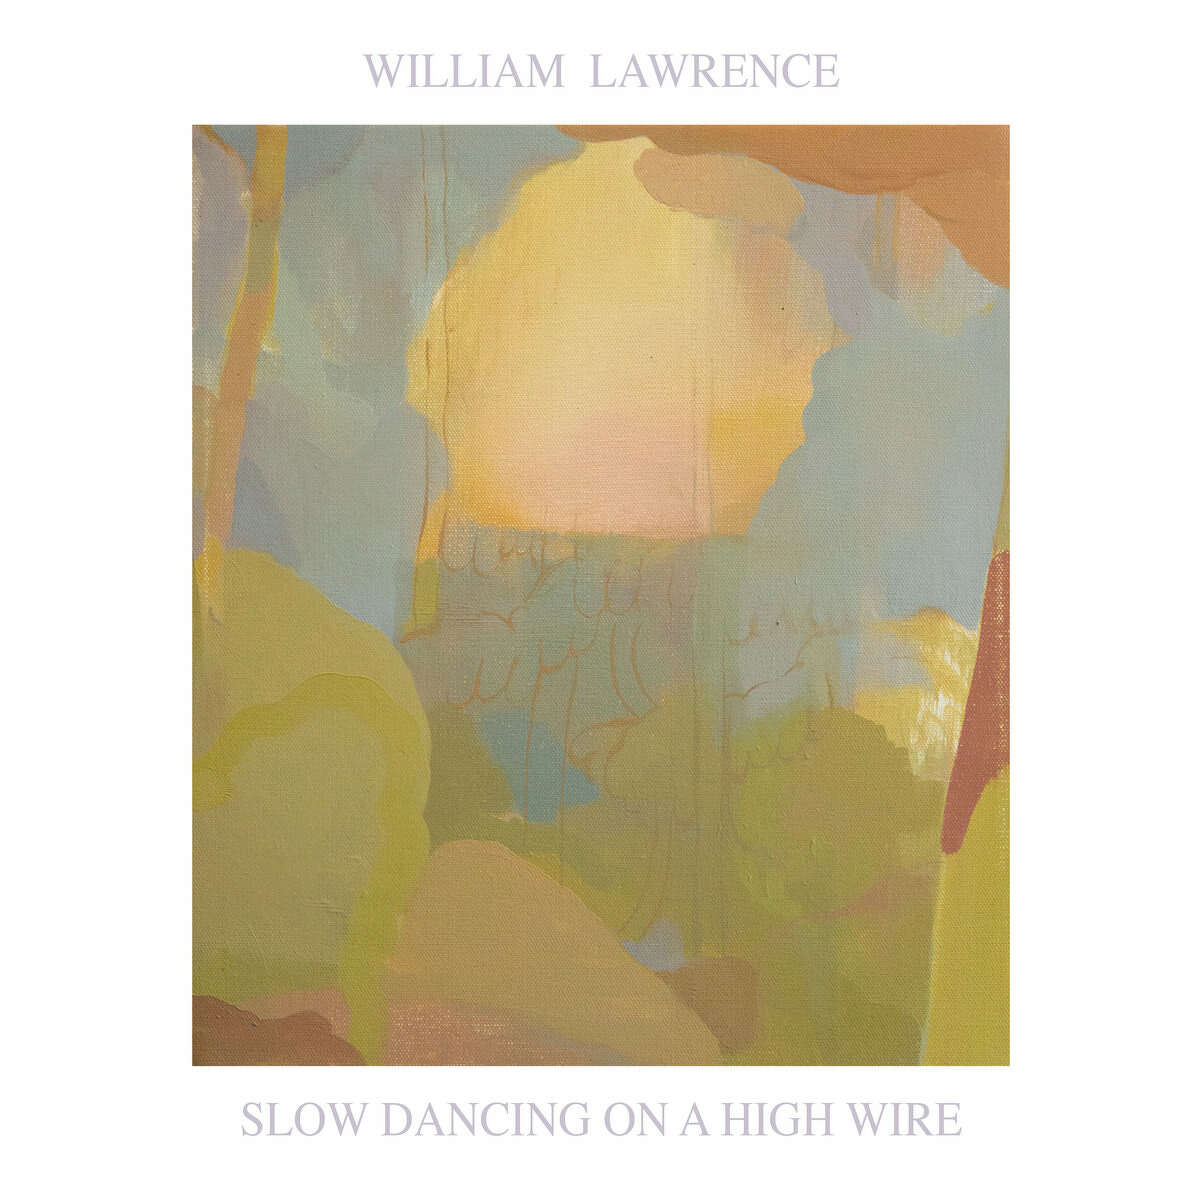 William Lawrence a?“ "Slow Dancing on a High Wire"